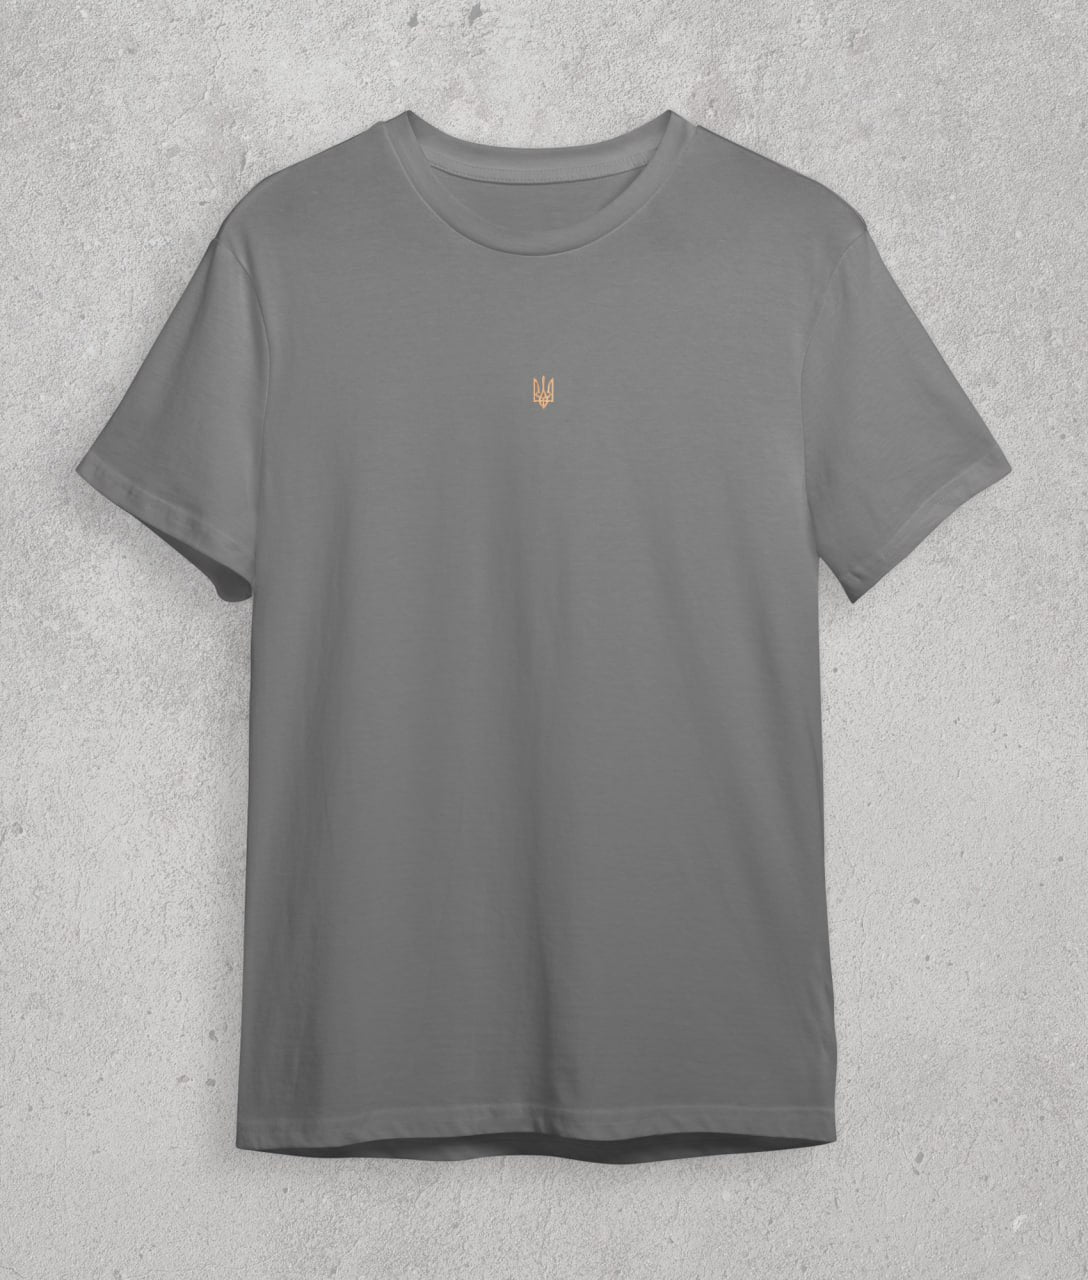 T-shirt Trident (small)